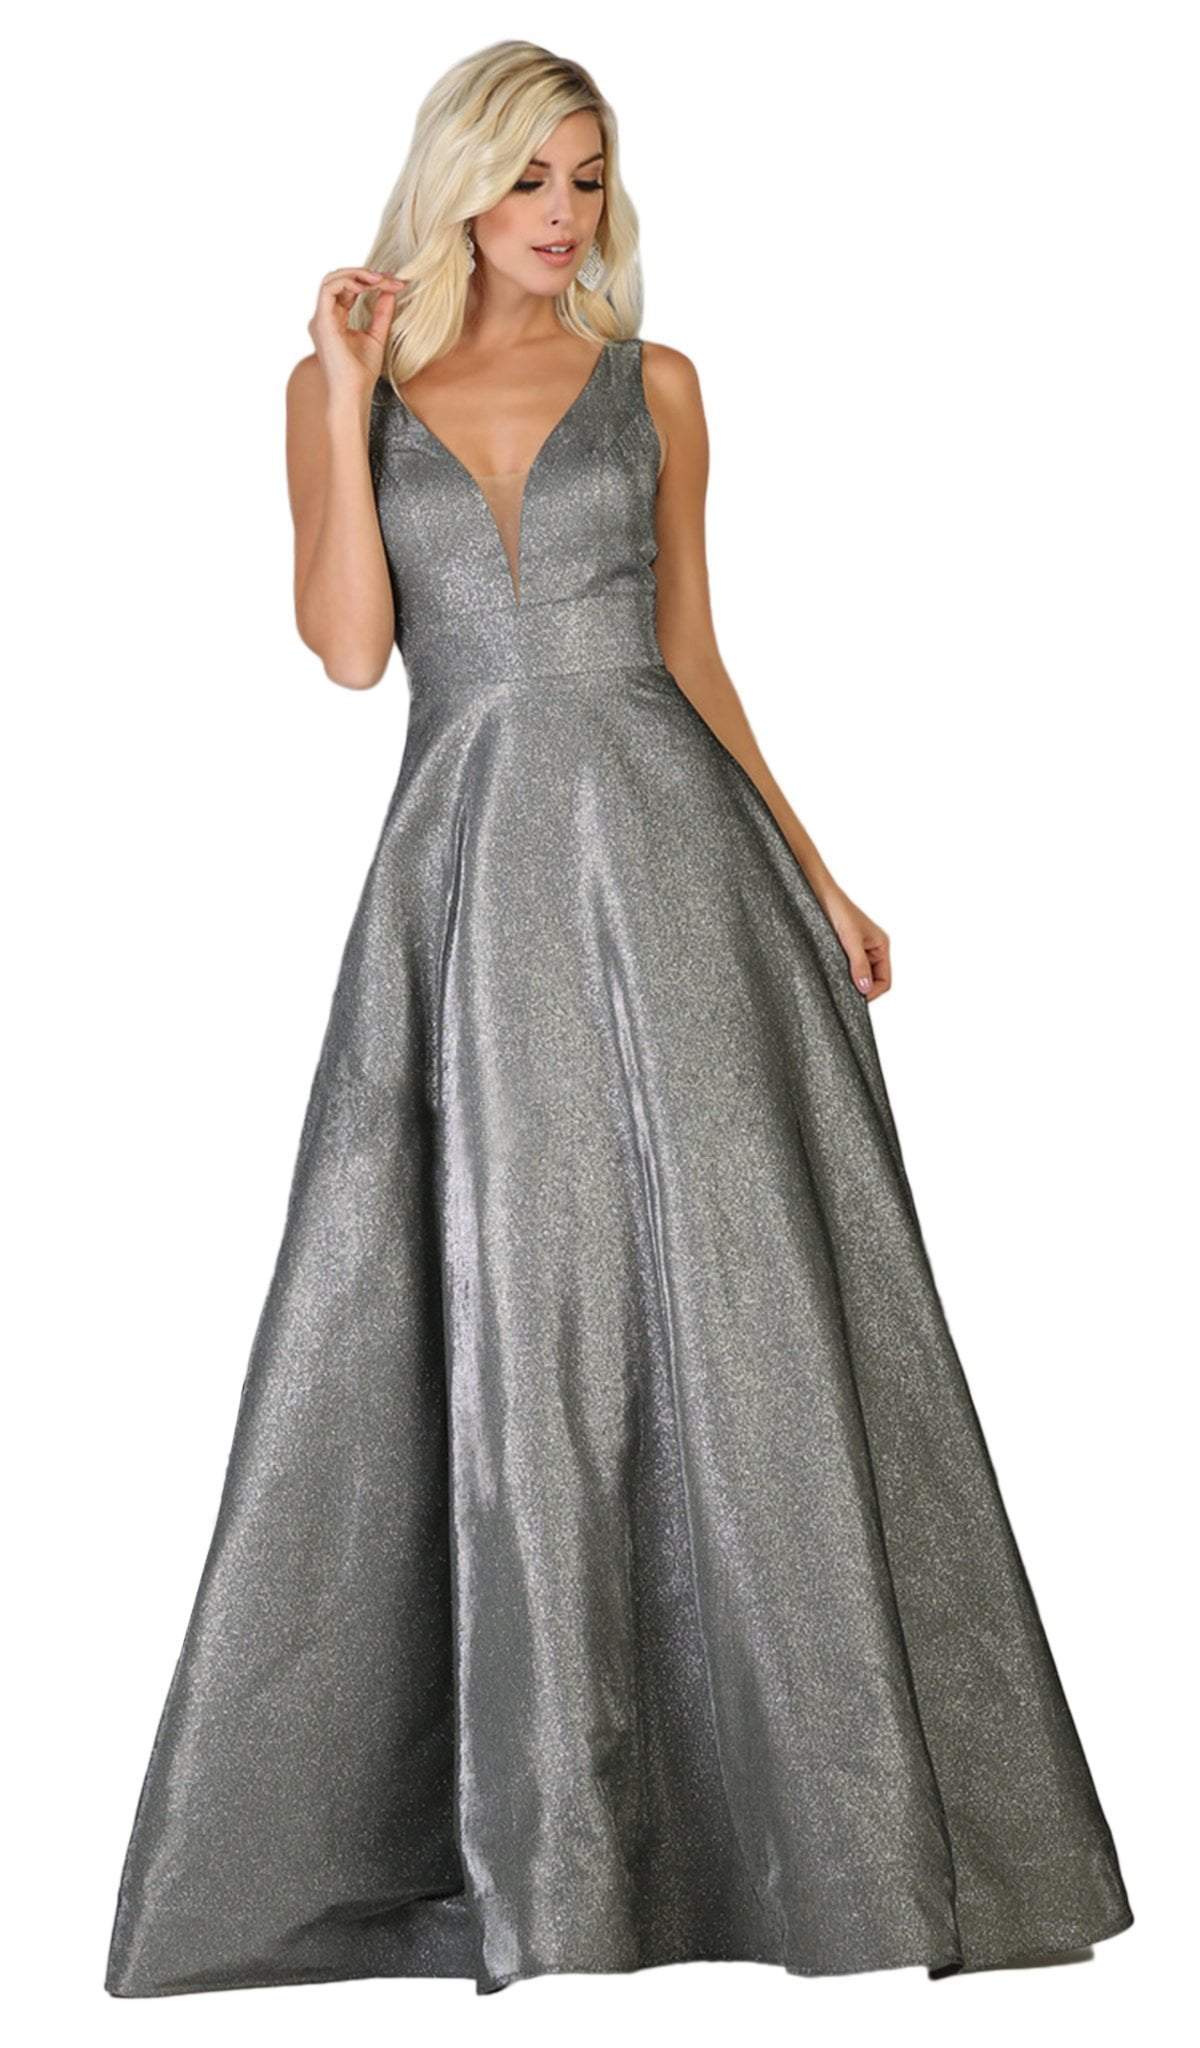 May Queen - RQ7755 Plunging V-Neck A-Line Evening Simple Prom Dress
